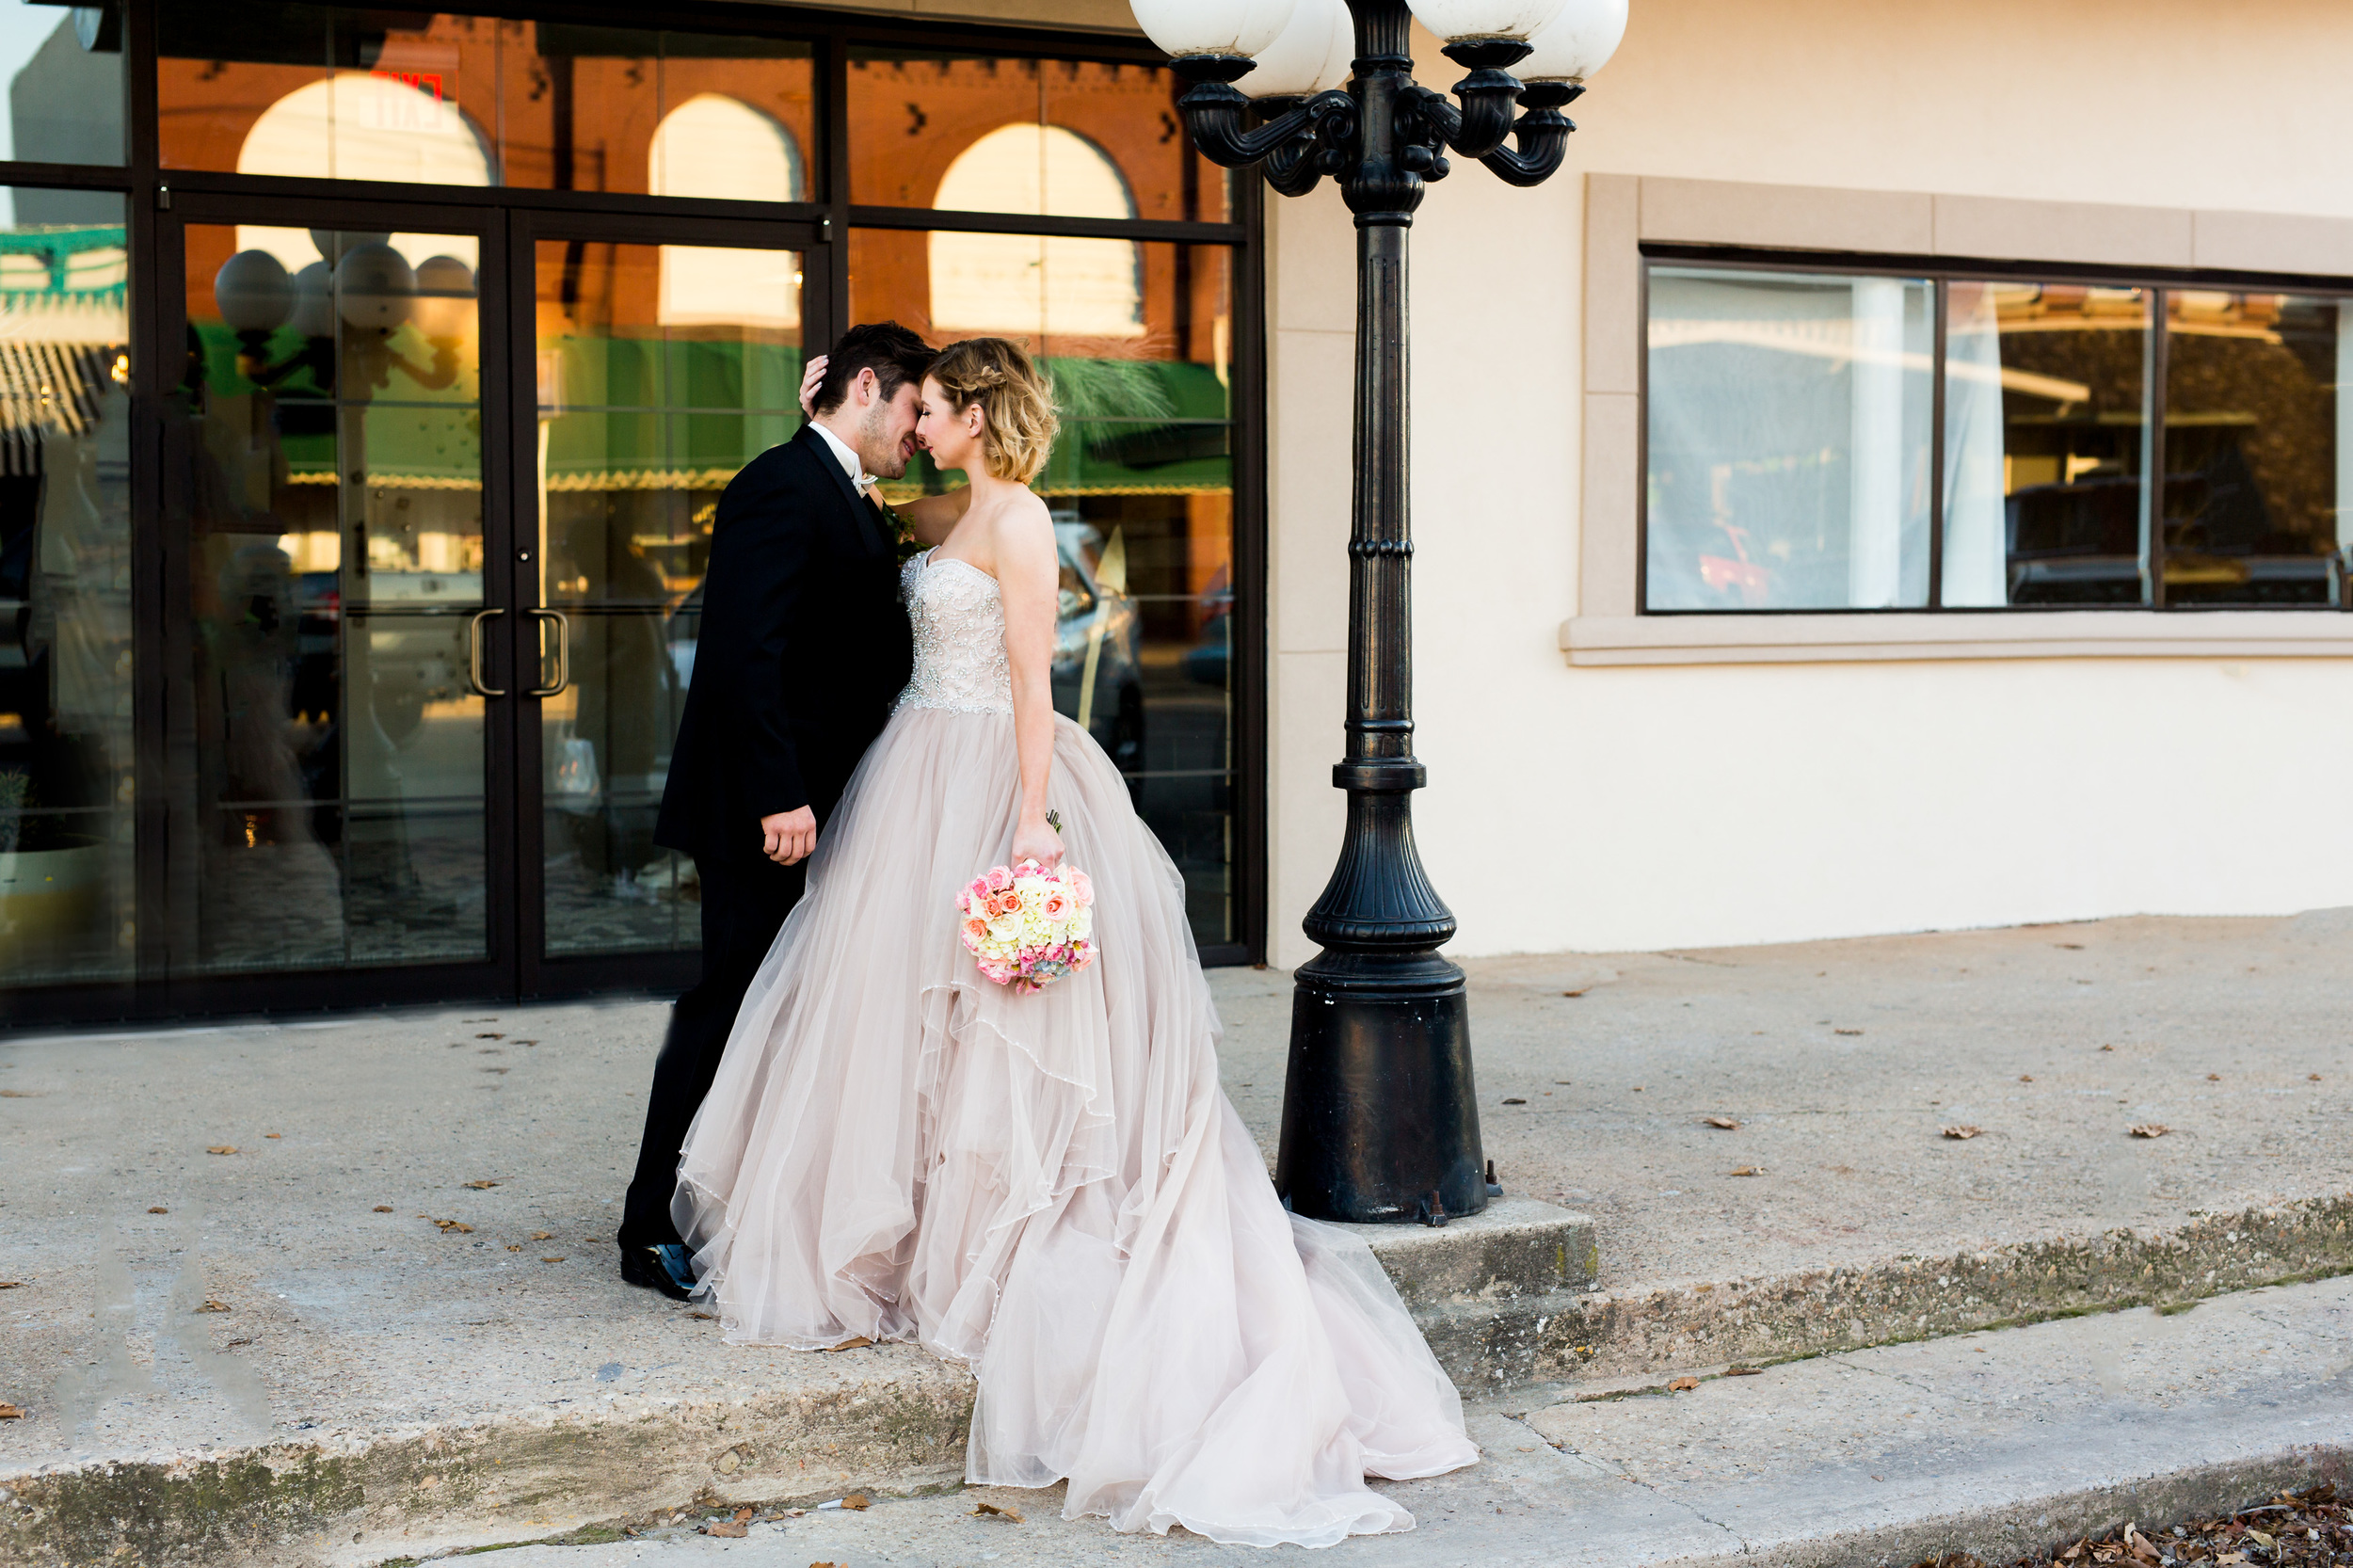 The Grand Canadian Theater OKC Purcell Wedding Venue Ashley Porton Photography Lamppost